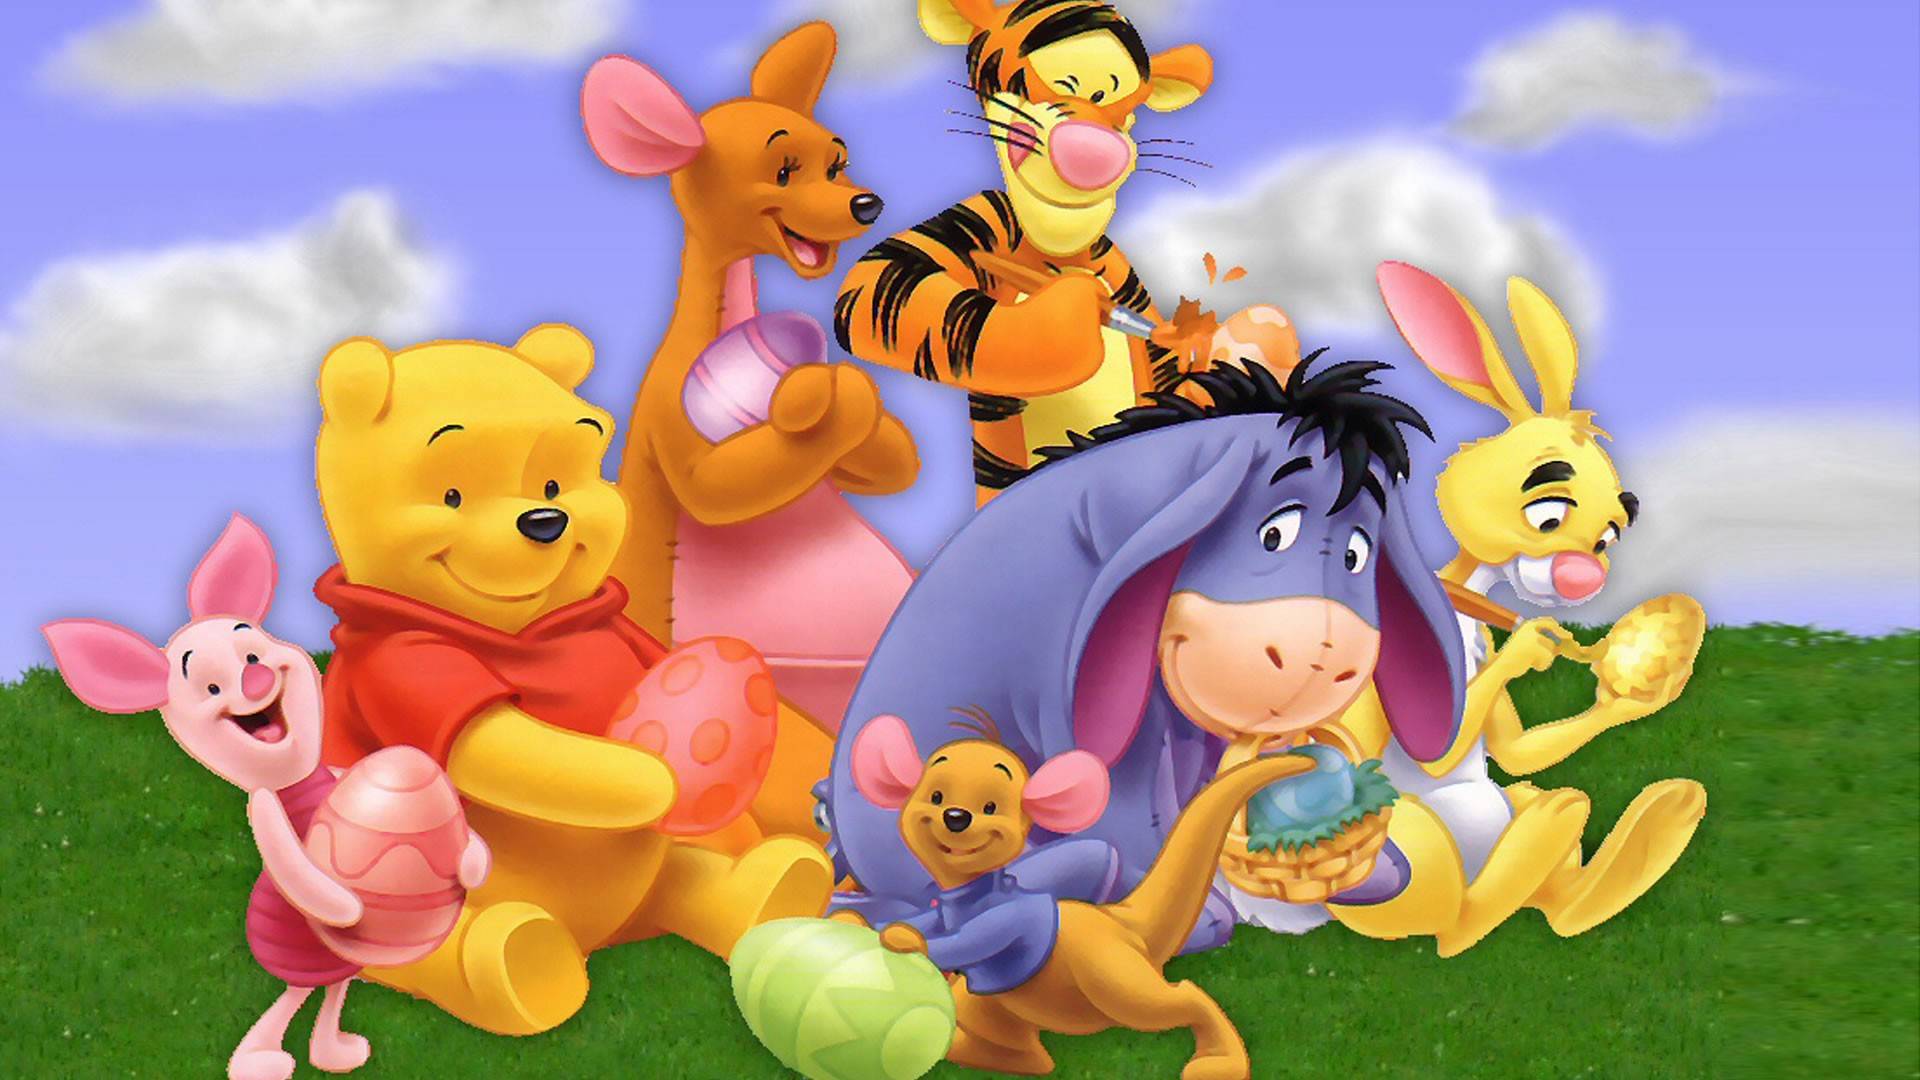 Winnie The Pooh And Friends Wallpaper